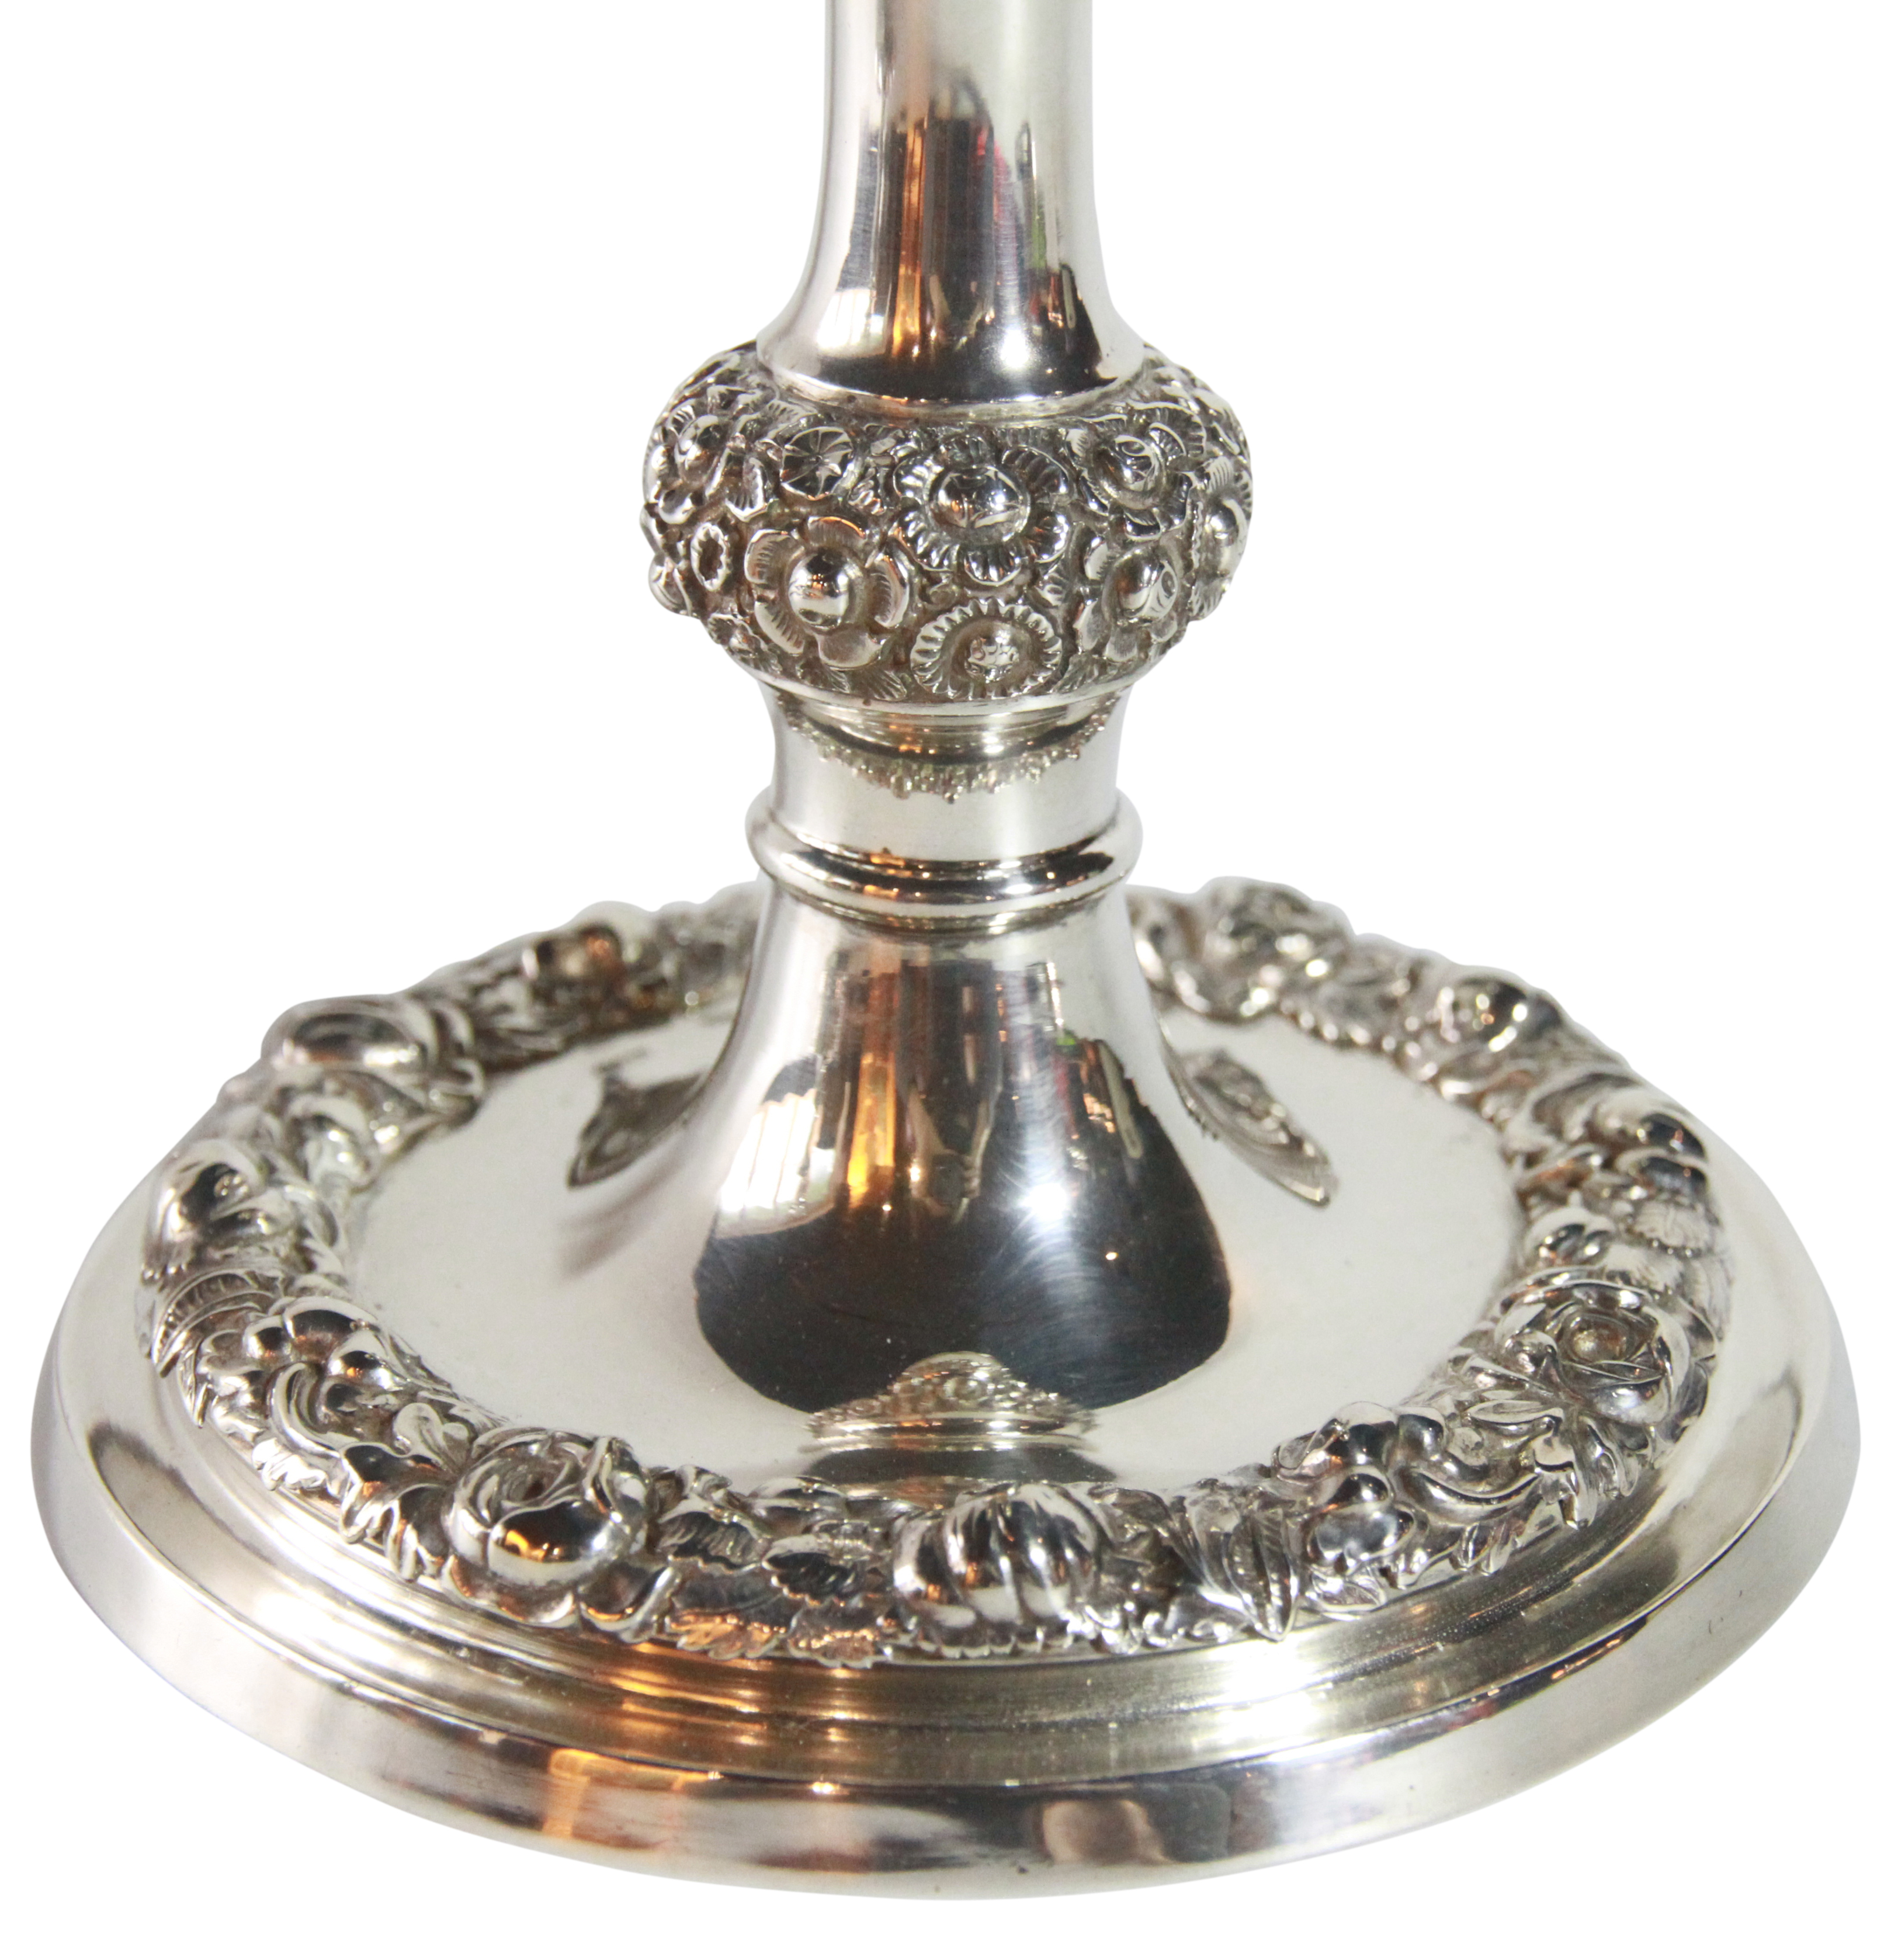 A pair of German Silver rounded candlesticks with stylized floral decoration - circa 1838 - (H: - Image 4 of 5